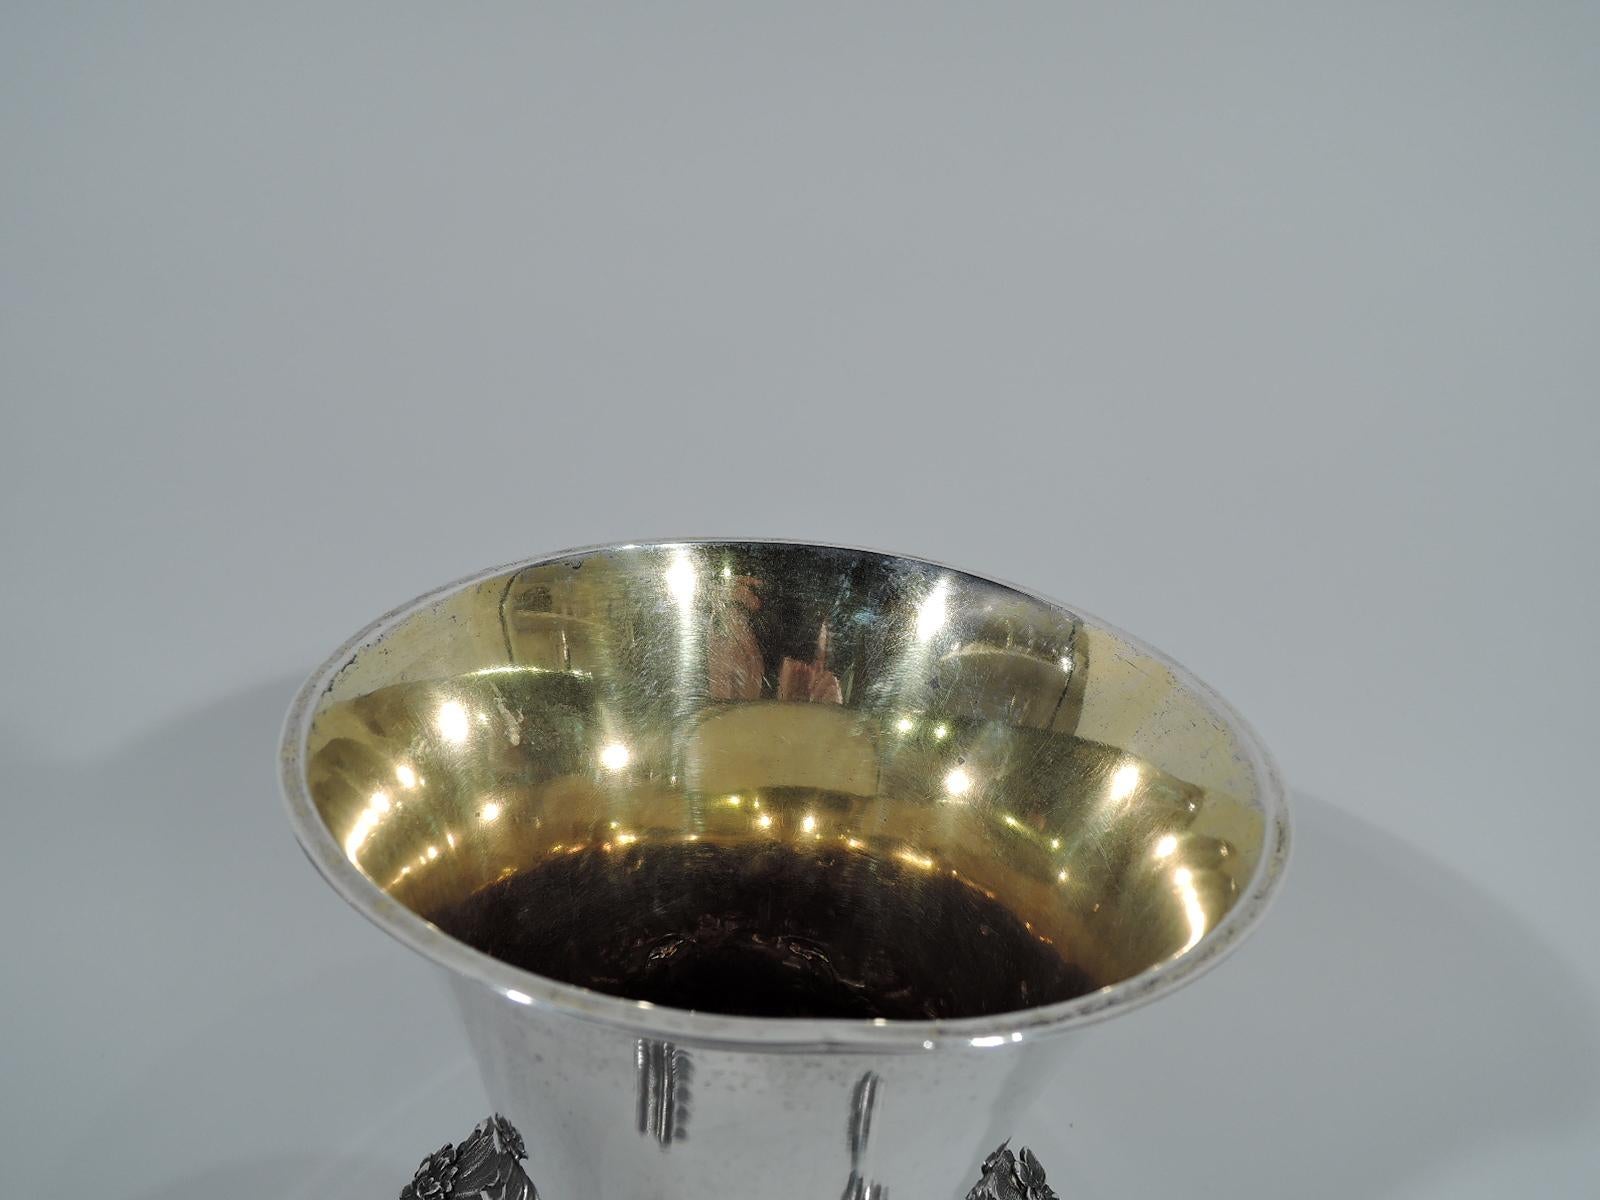 Indian Colonial silver chalice with chased and stippled leaves and flowers. Bellied bowl with flared rim, leaf flange and raised foot. Bowl decorated with leaves and flowers alternating with flutes. Foot decorated with leaves. Gilt interior. A